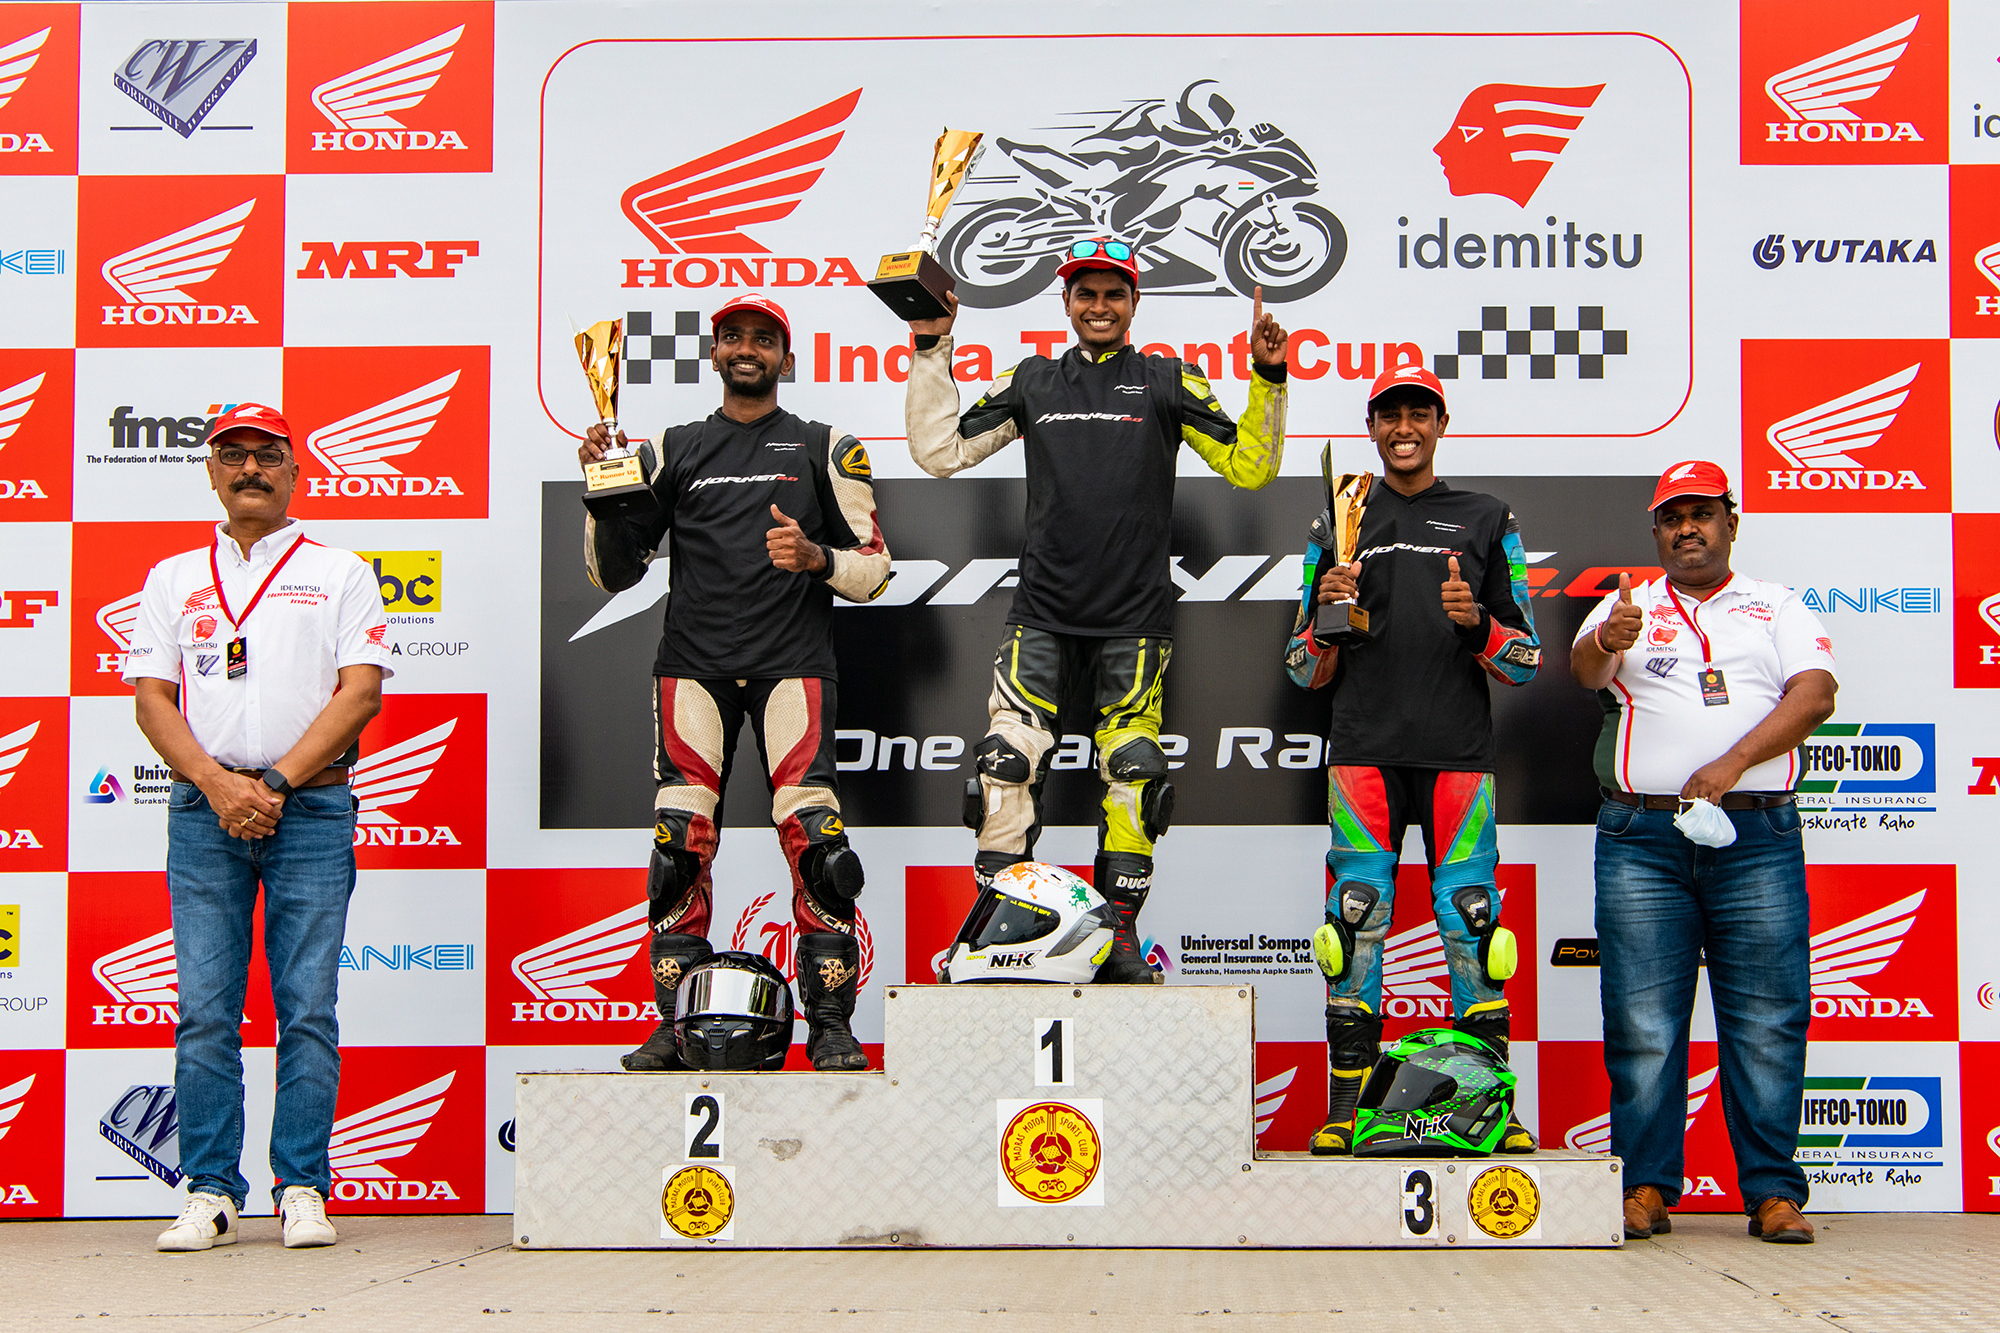 double-podium-finishes-for-idemitsu-honda-sk-69-racing-teamin-round-2-ofindian-national-motorcycle-racing-championship-2021-ps165cc